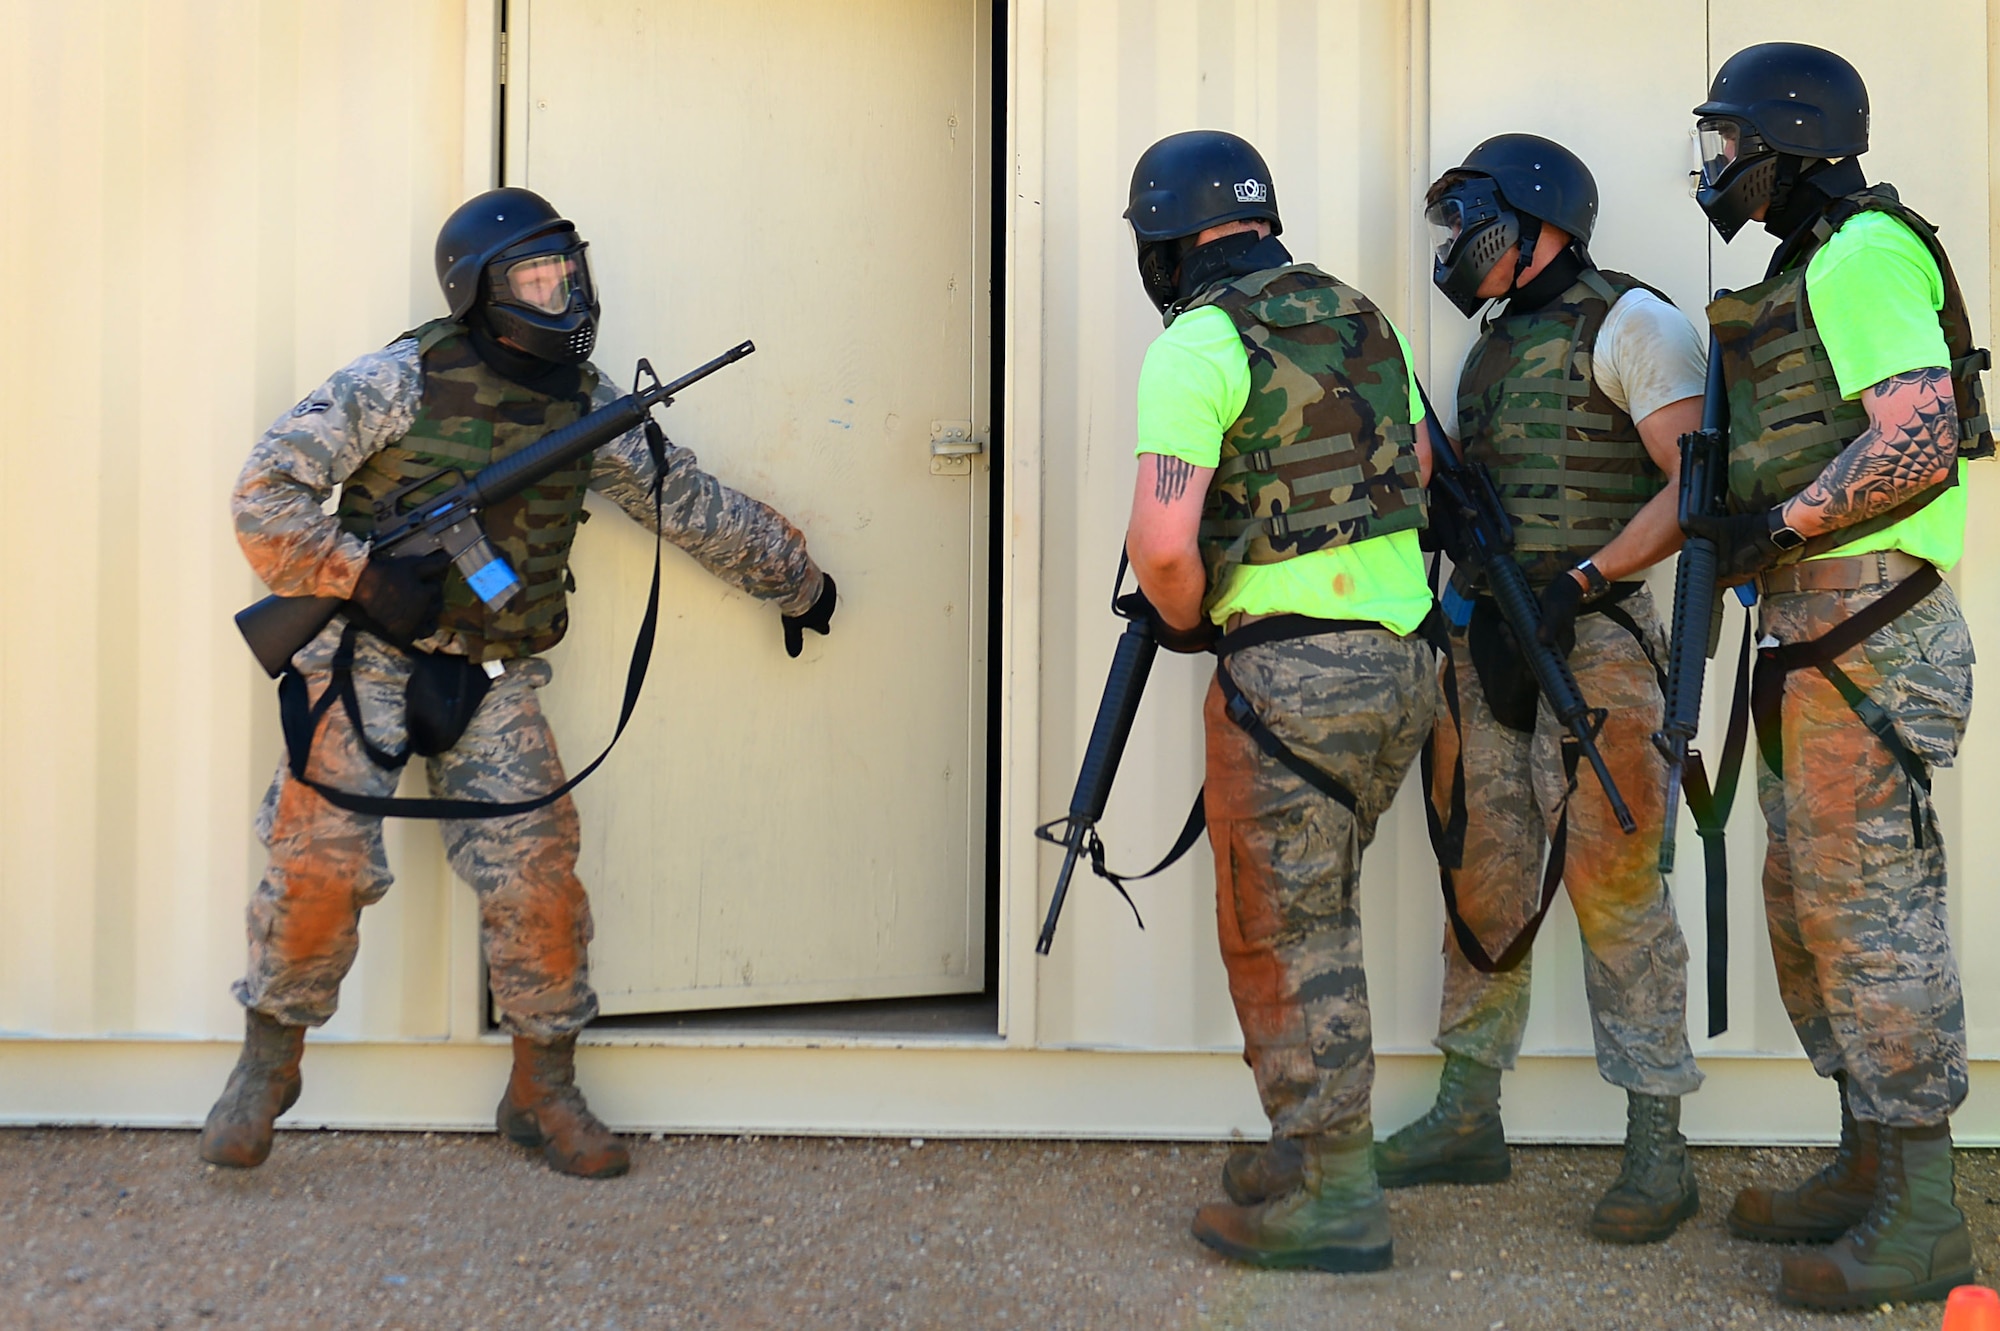 U.S. Airmen assigned to the 20th Component Maintenance Squadron prepare to enter a combat training facility called the “shoot house” during a 20th Security Forces Squadron Combat Challenge at Shaw Air Force Base, S.C., March 24, 2017. Shoot house participants entered a simulated hostile environment where they were required to rescue a victim and neutralize threats.  (U.S. Air Force photo by Airman 1st Class Christopher Maldonado)